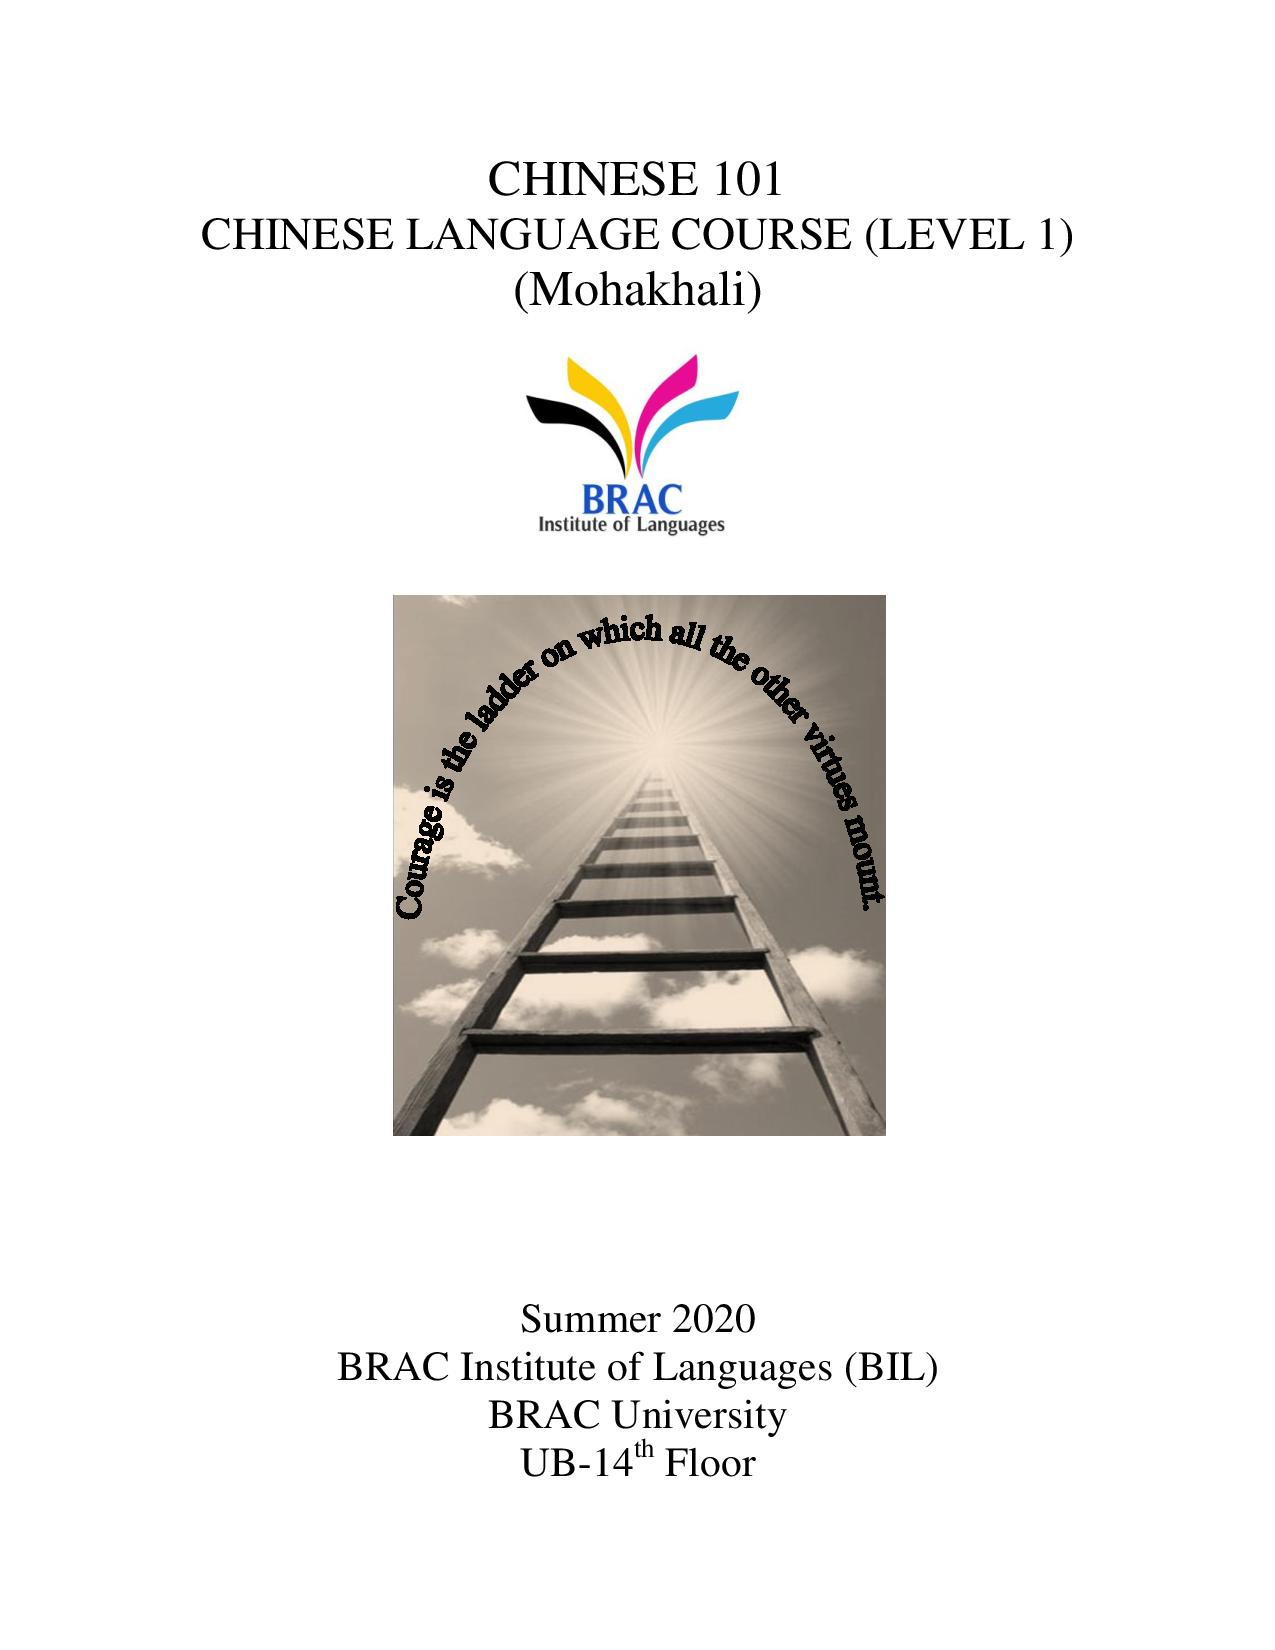 Chinese Language Course  CHN101